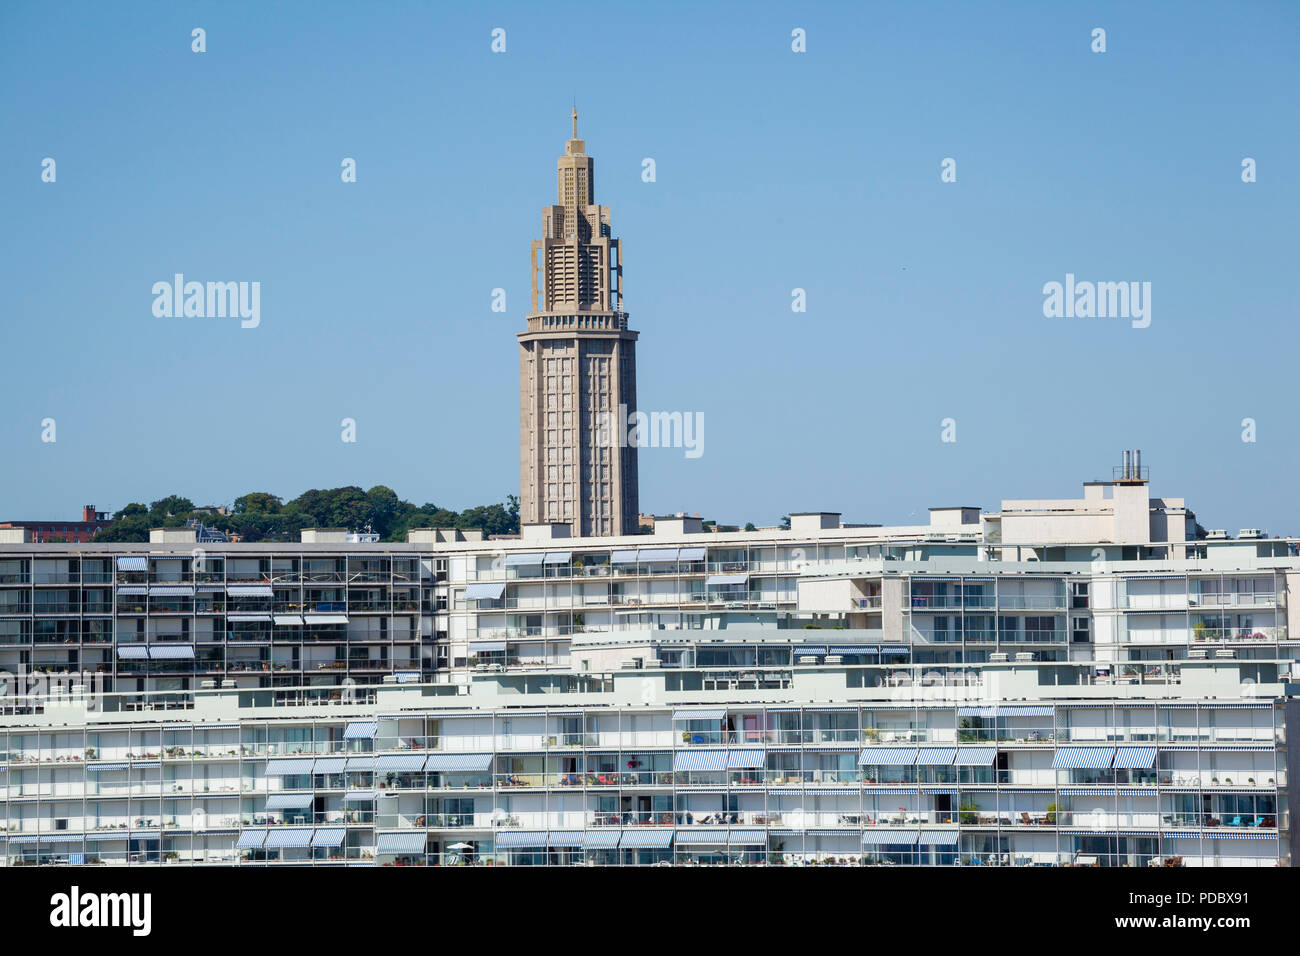 A view from the sea of The Church of St. Joseph behind the iconic apartments 'Residence de France' at Le Havre, Normandy, France Stock Photo